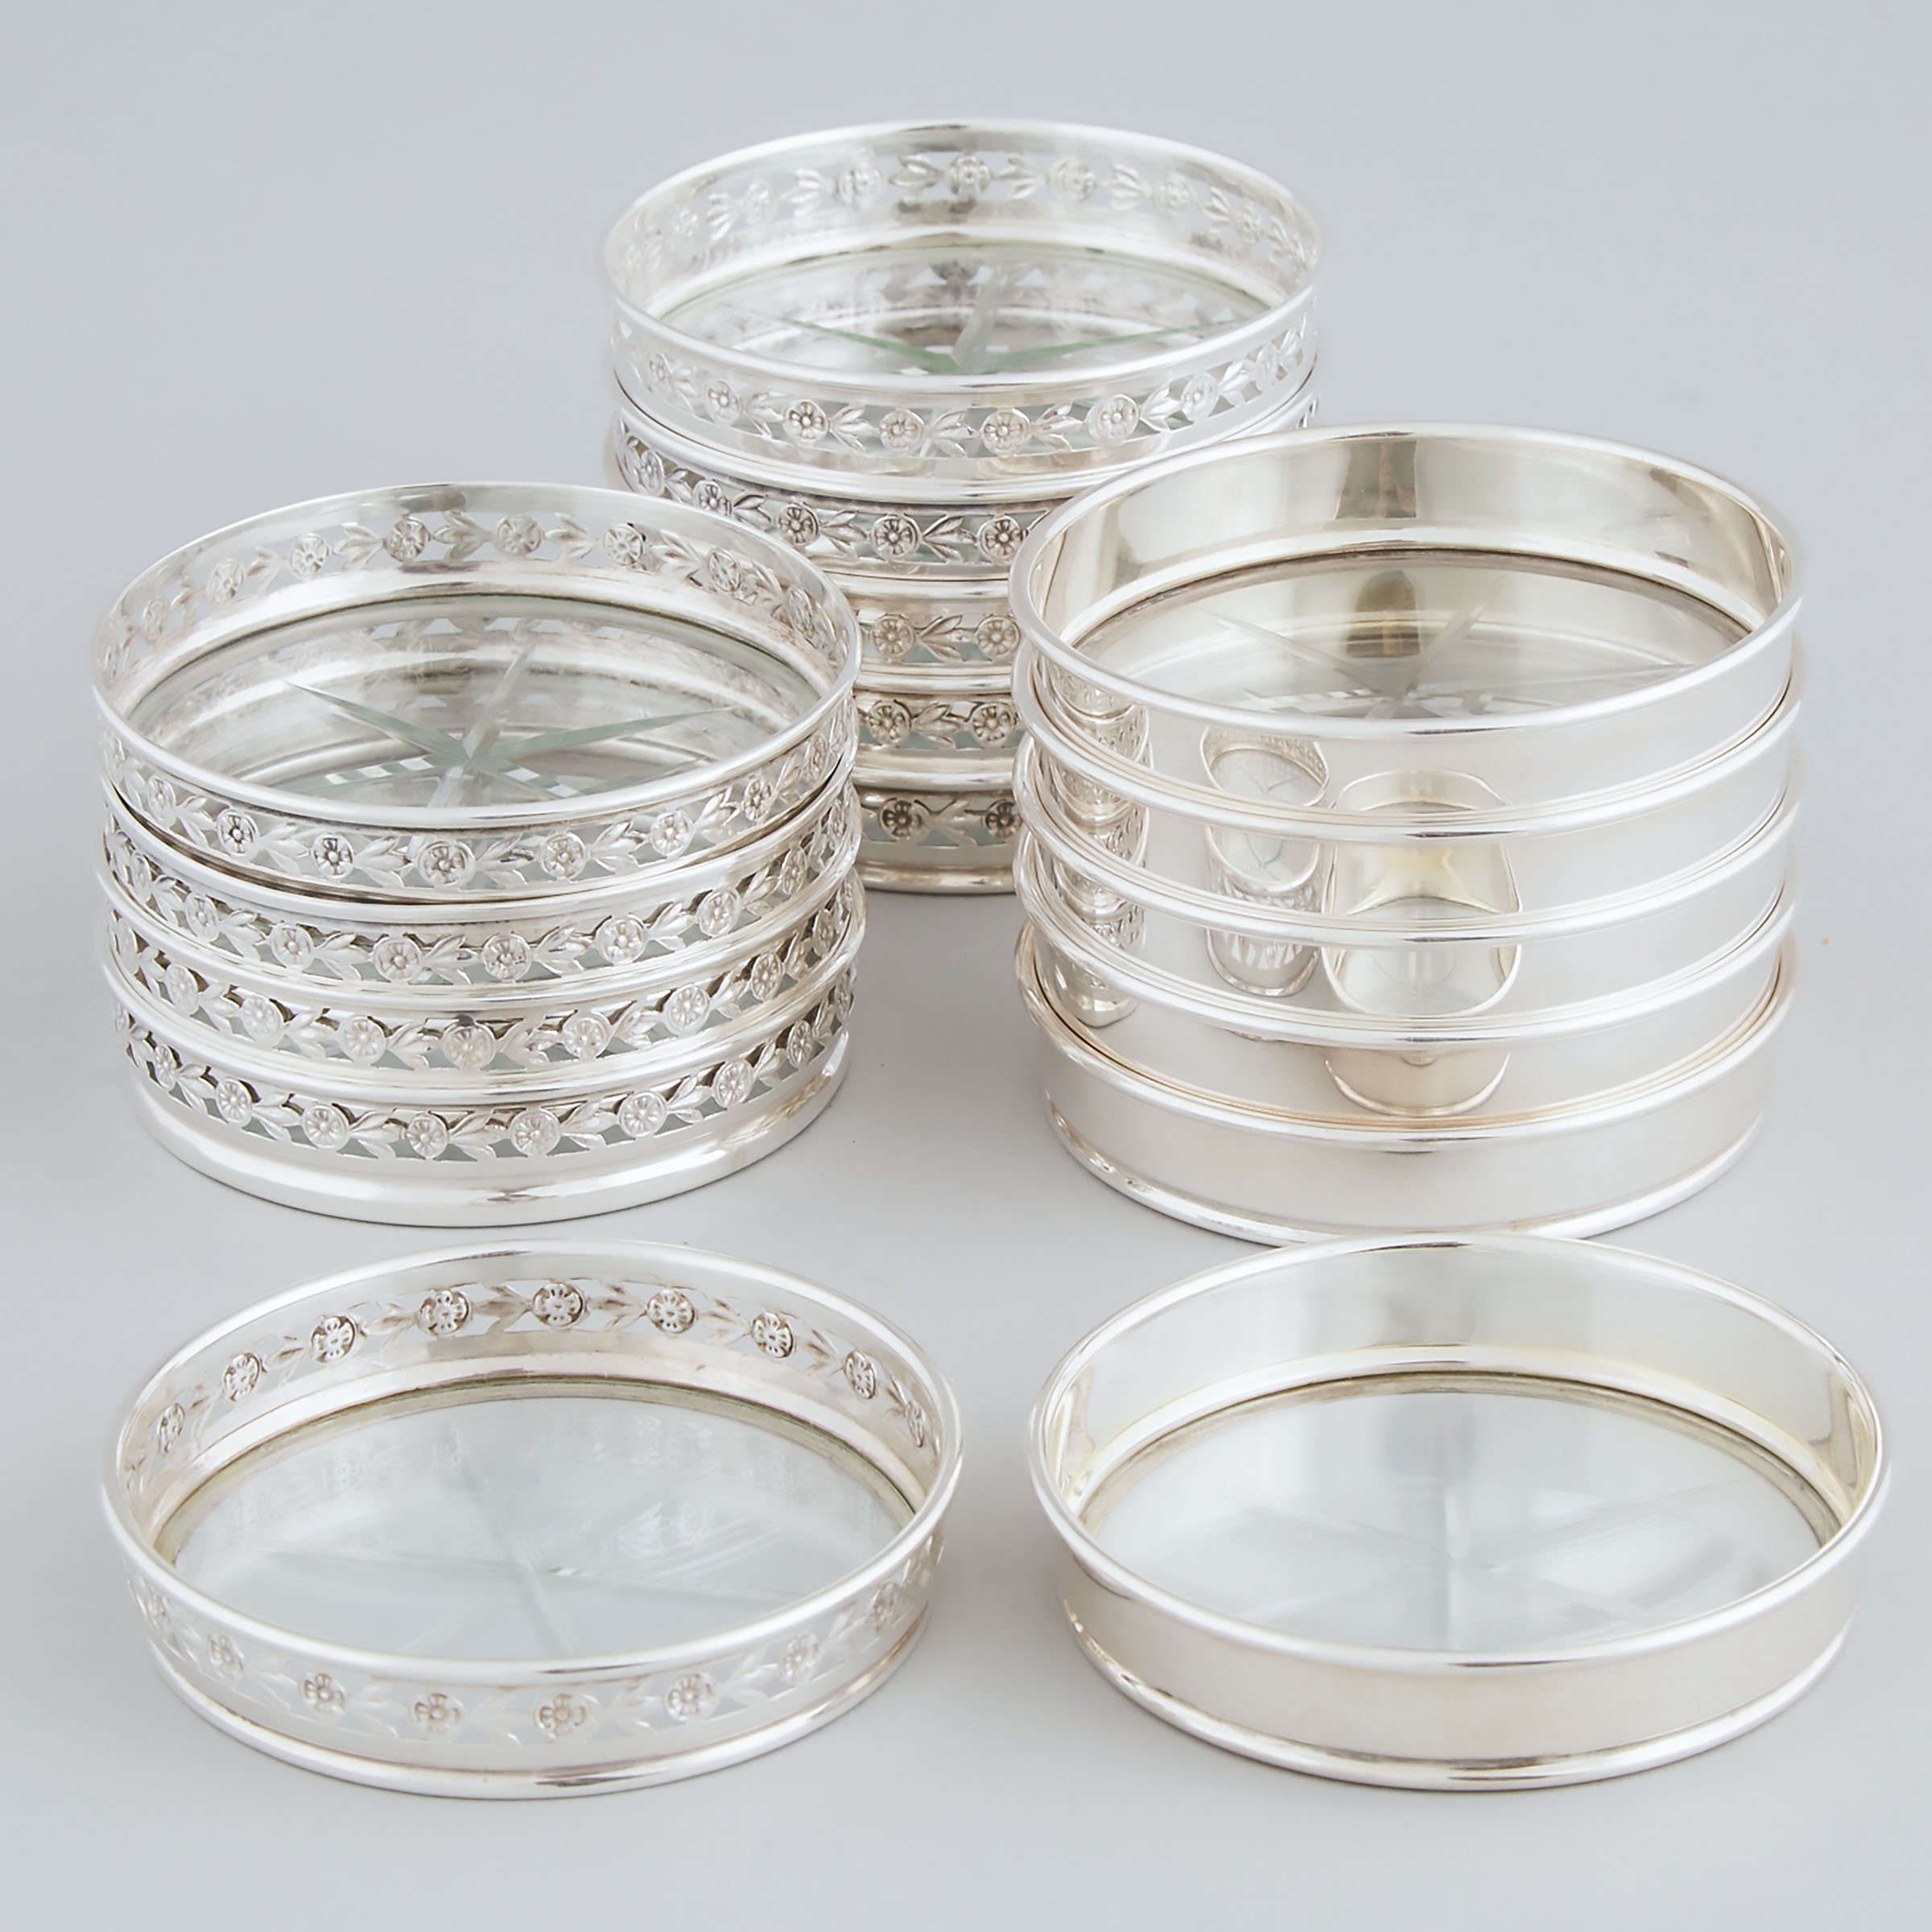 Sixteen Canadian Silver Mounted Cut Glass Coasters, Henry Birks & Sons, Montreal, Que., 20th century